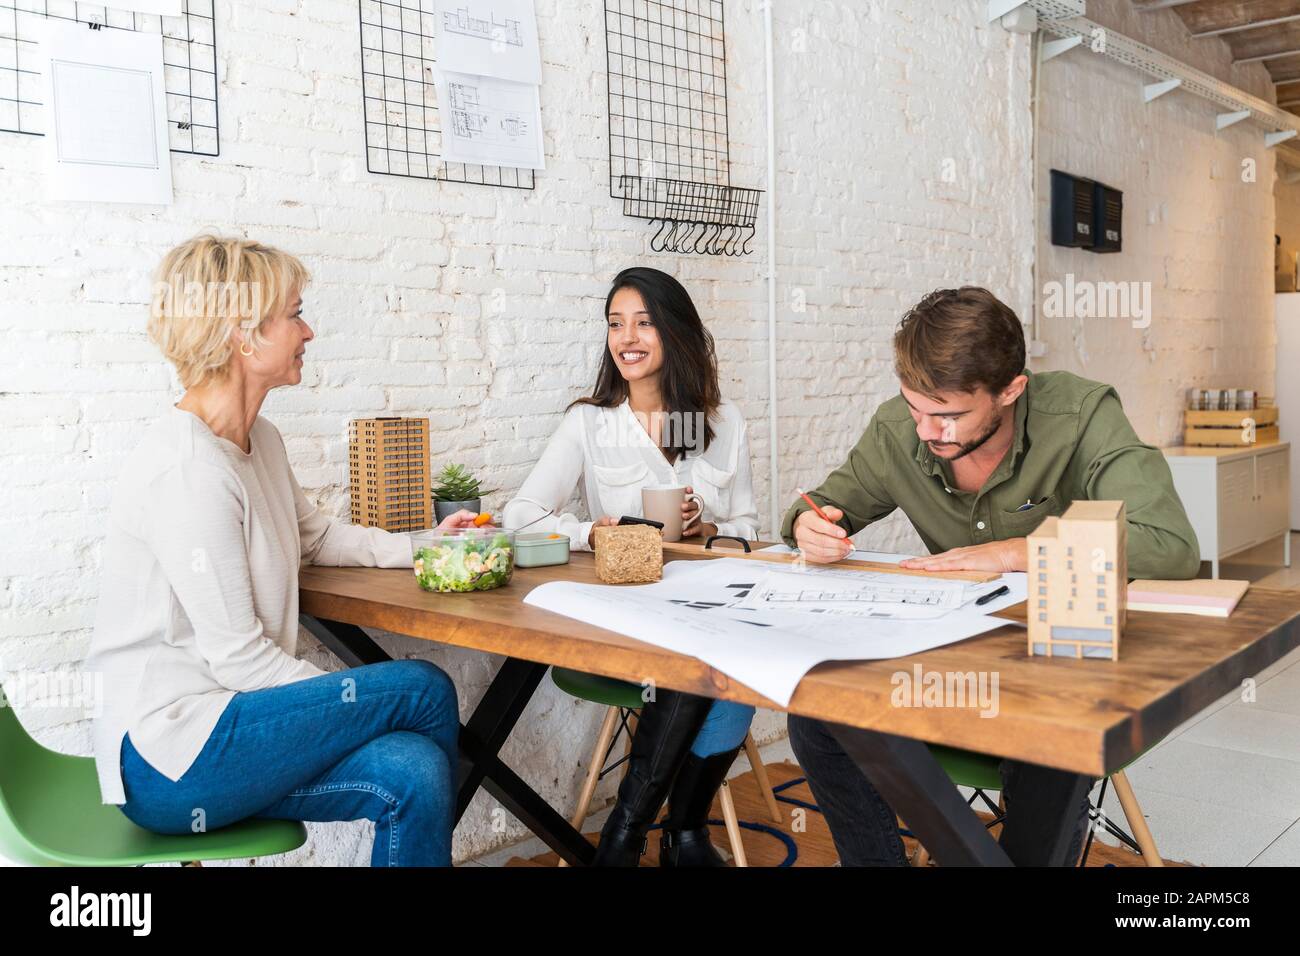 Three colleagues sharing desk in architect's office Stock Photo